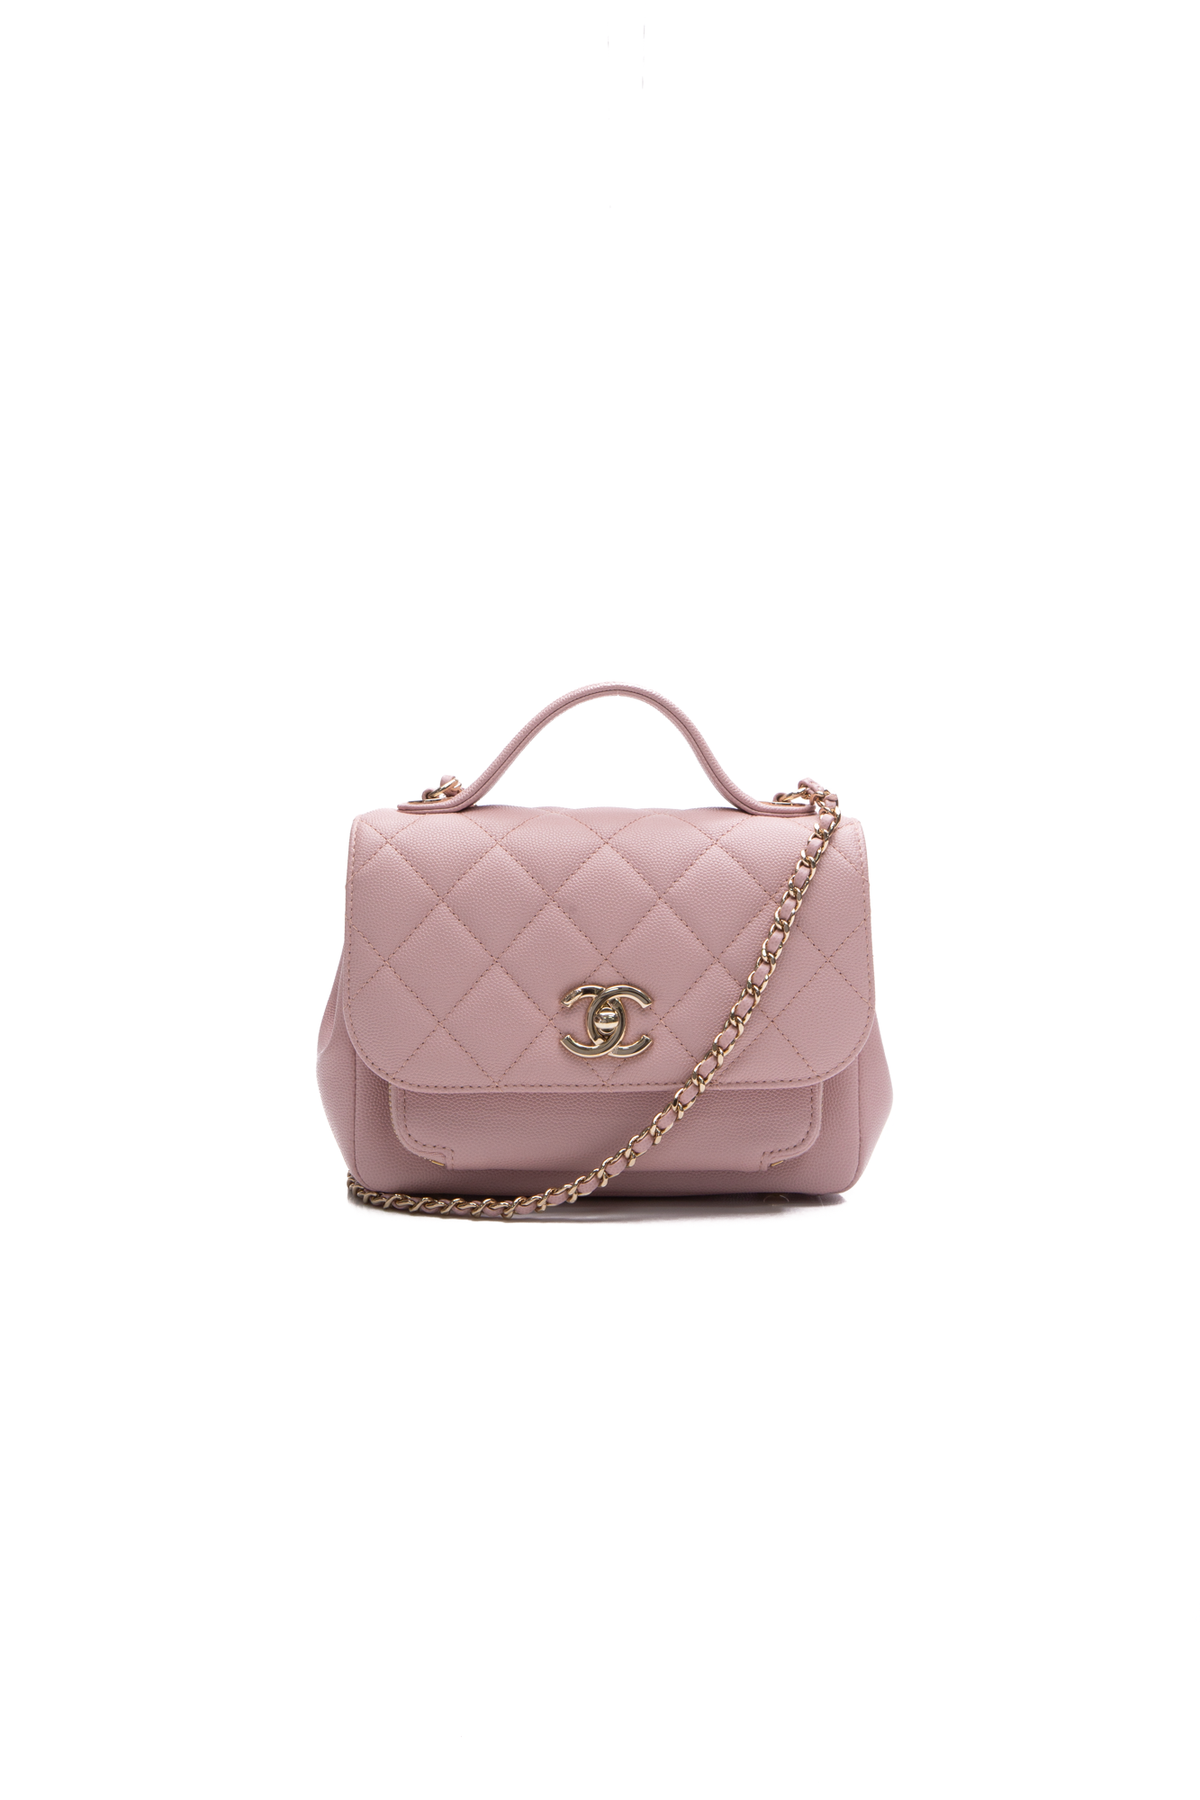 CHANEL VIP Exclusive Lt Pink Clutch on Chain *New - Timeless Luxuries